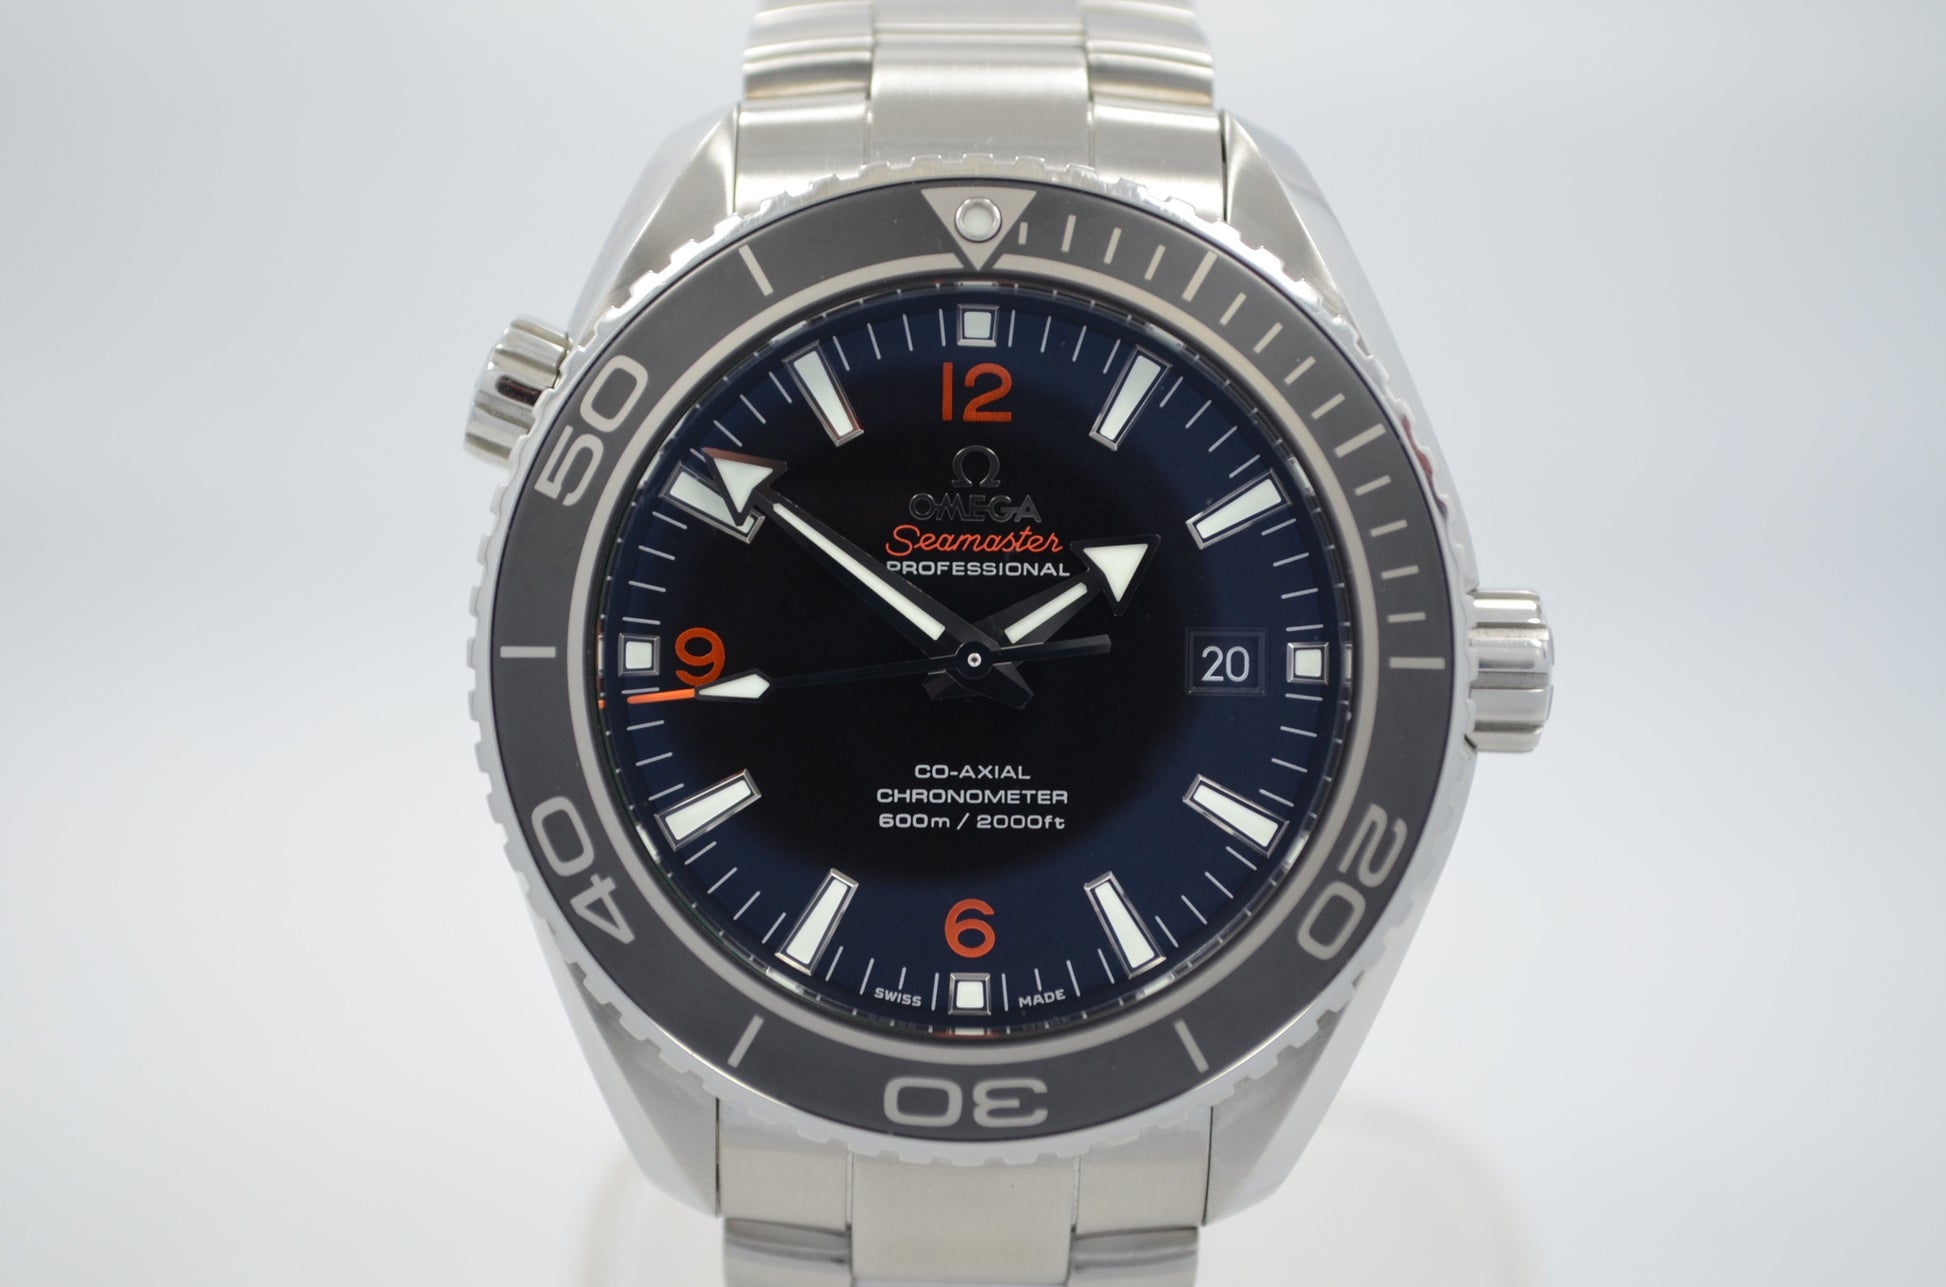 Omega 232.30.46.21.01.003 Seamaster Planet Ocean Professional 600M Master Co-Axial Watch - Hashtag Watch Company